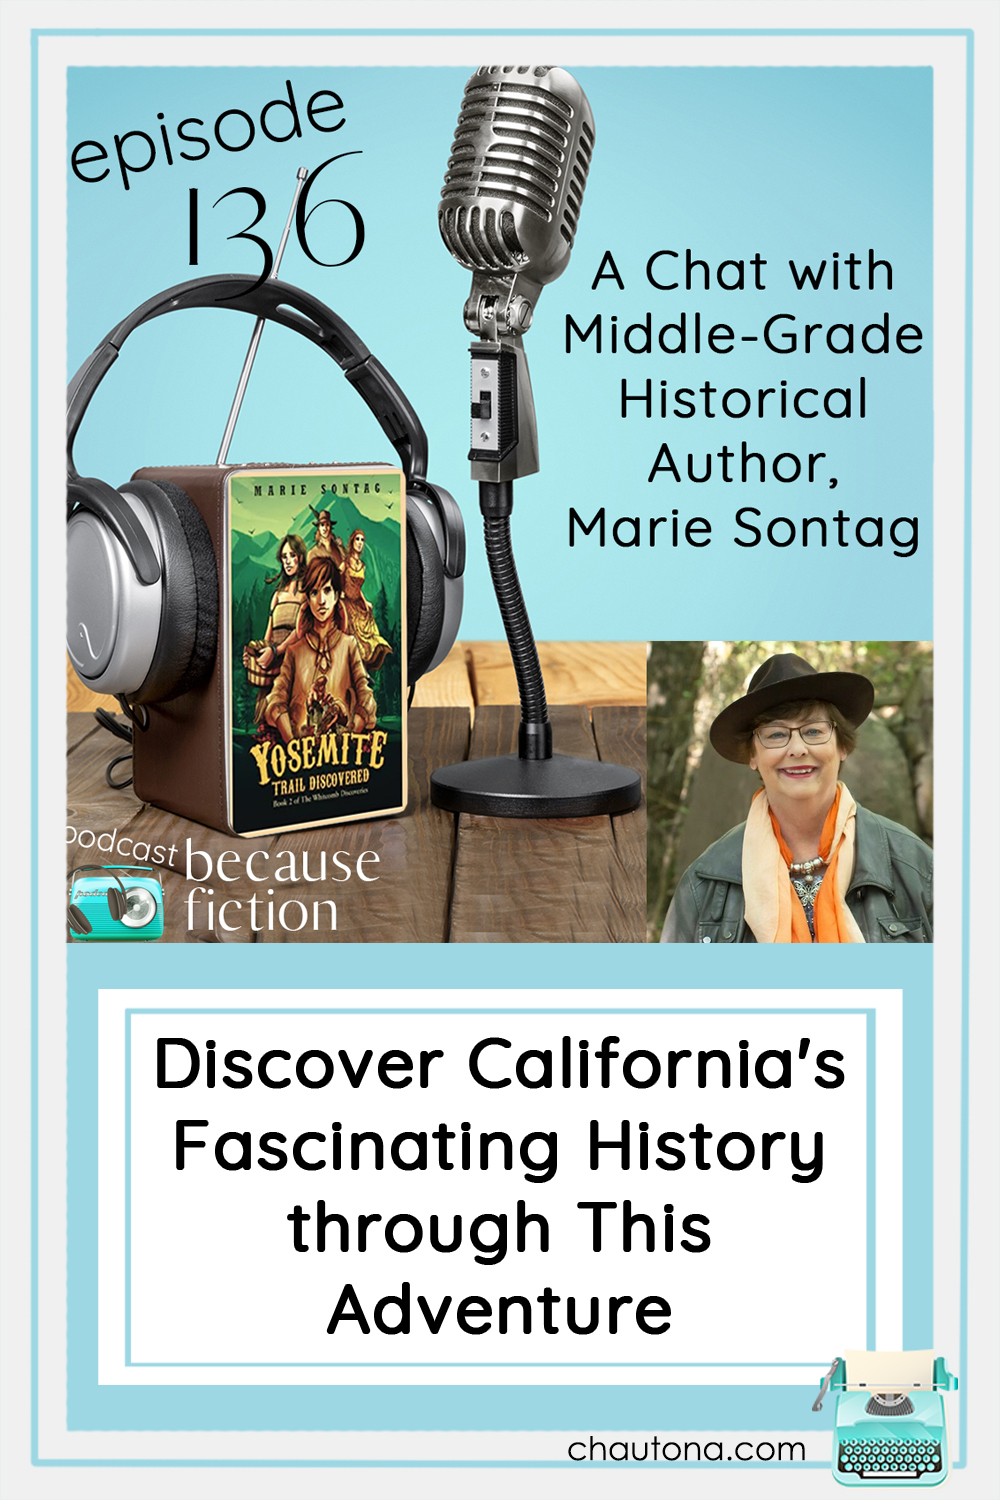 Yosemite Trail Discovered by Marie Sontag continues the exciting adventures of the Whitcomb Discoveries series for youth. via @chautonahavig